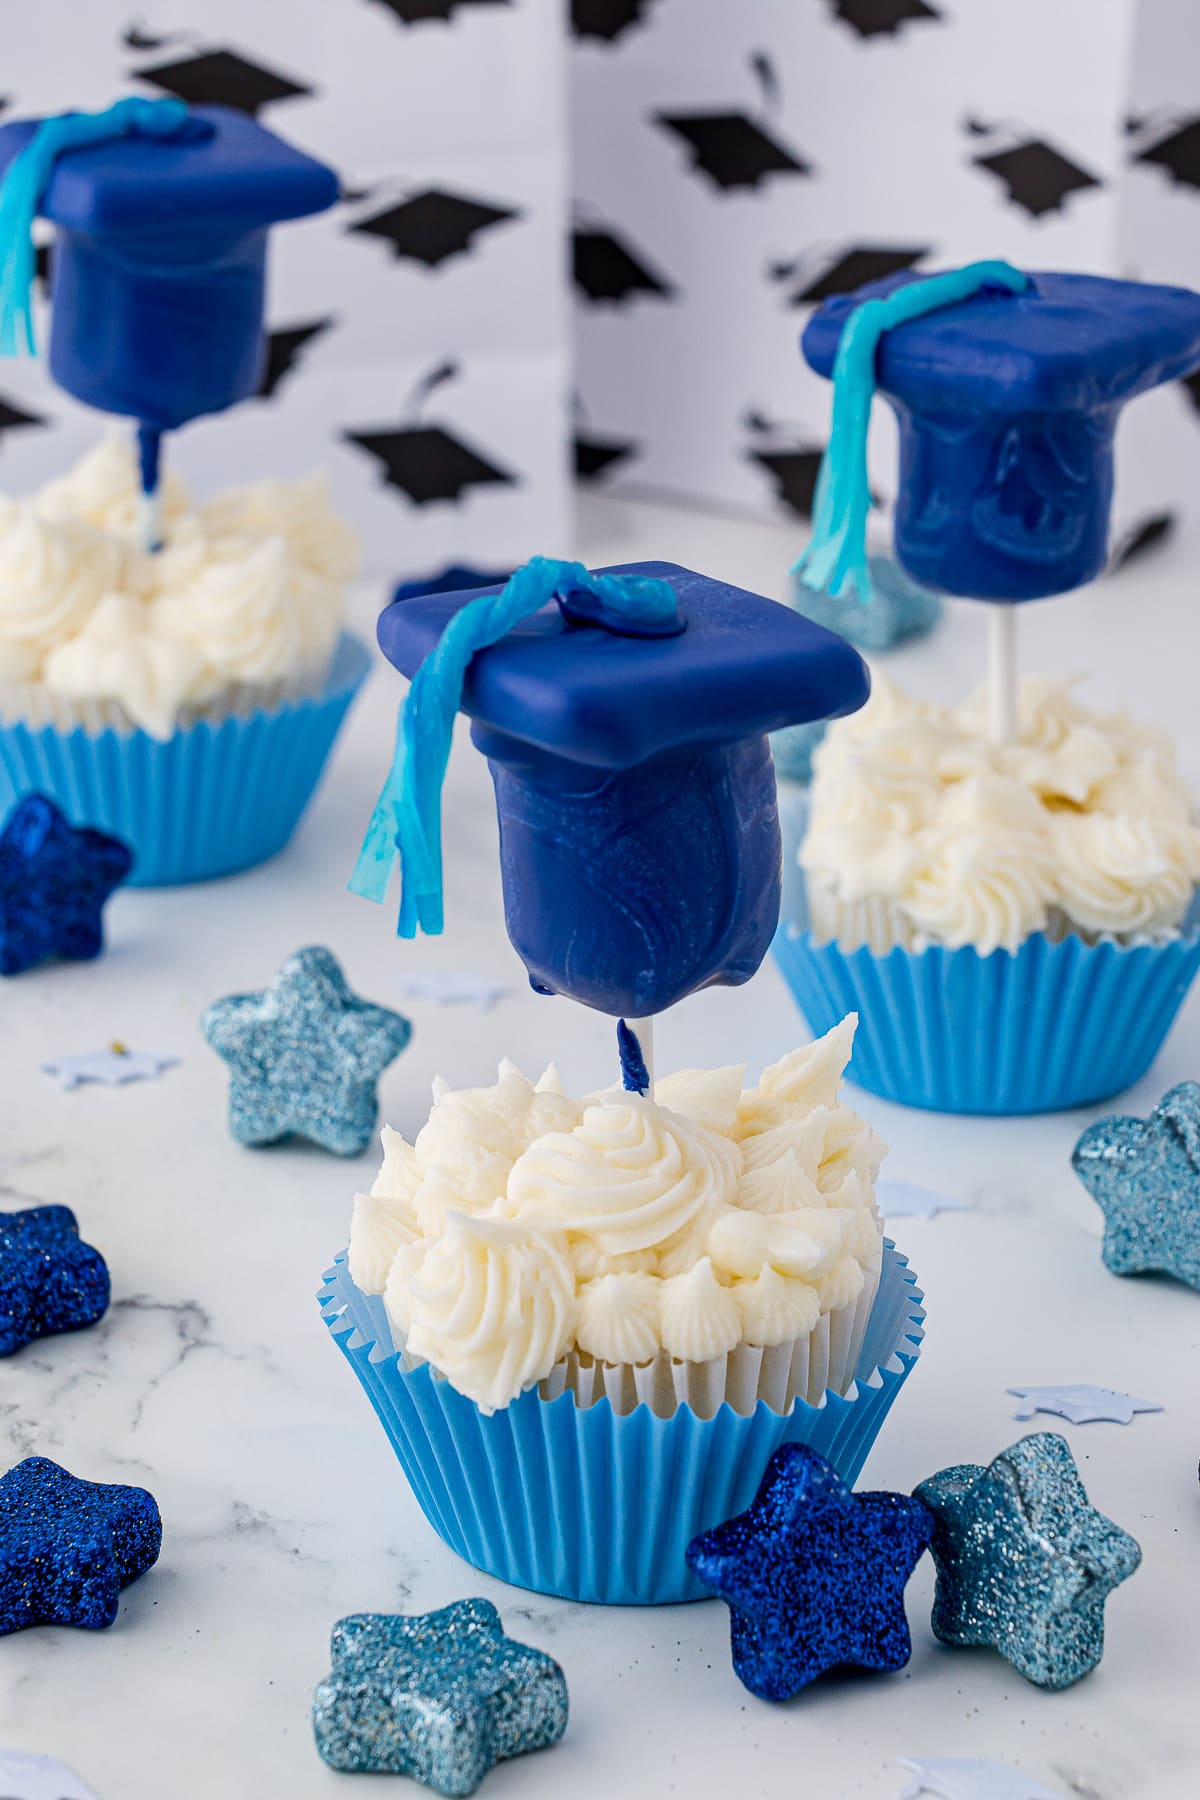 A white cupcake with white frosting in a blue cupcake wrapper topped with a blue chocolate graduation cap and a blue tassel made out of fruit rollups